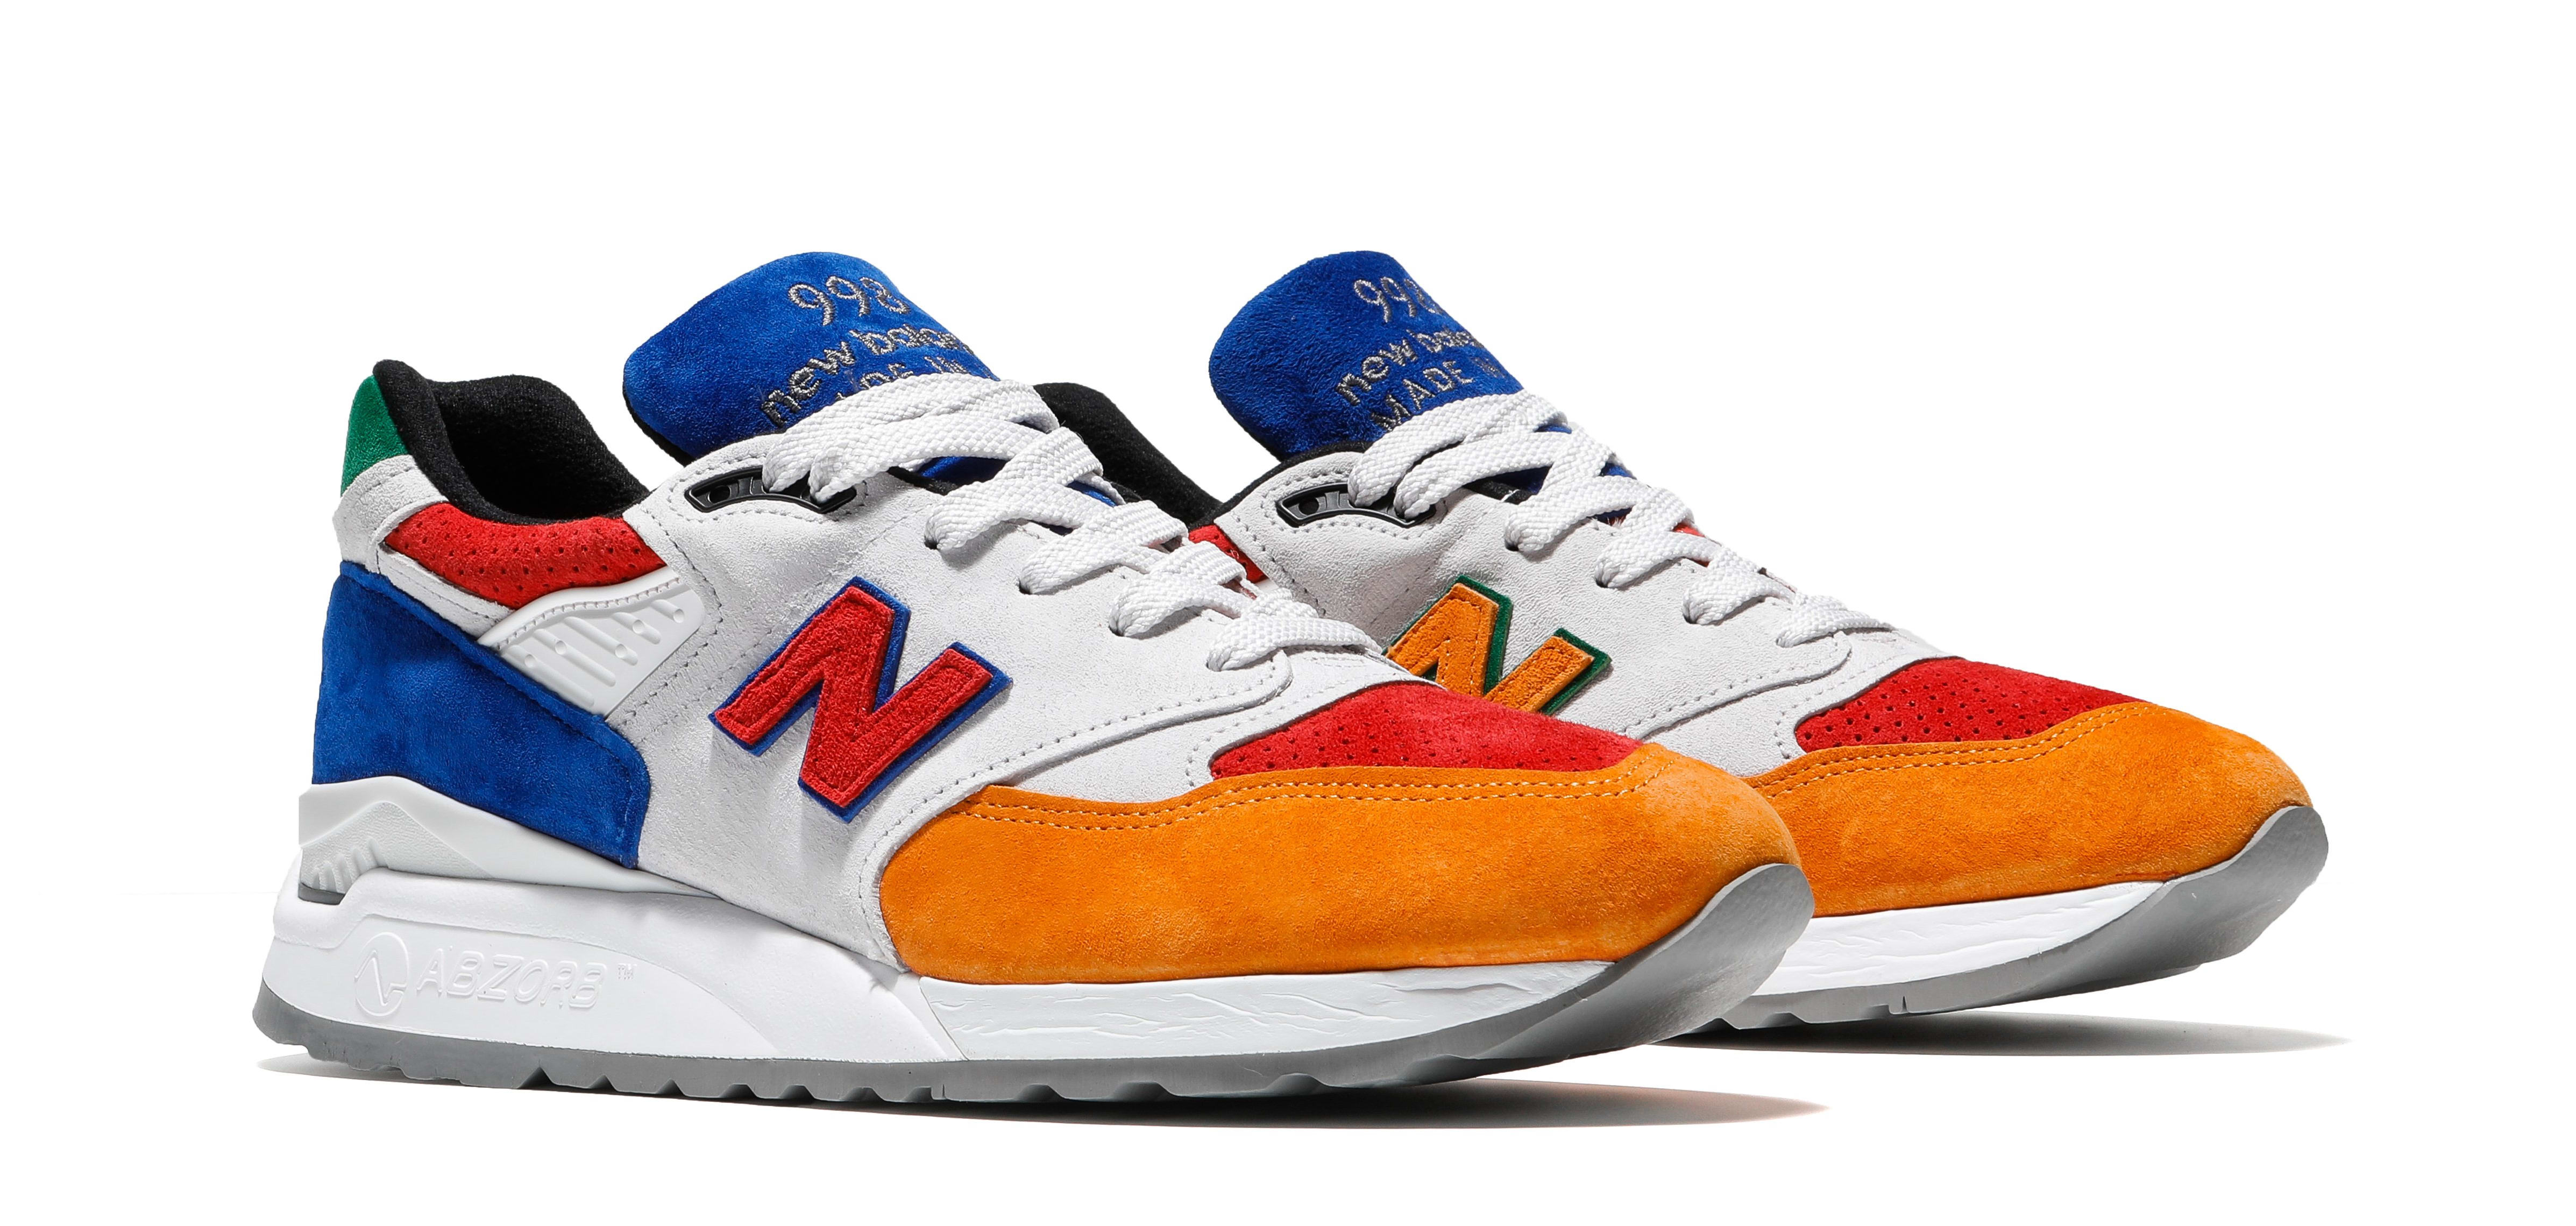 Bodega New Balance 998 'Mass Transit' Release Date | Sole Collector